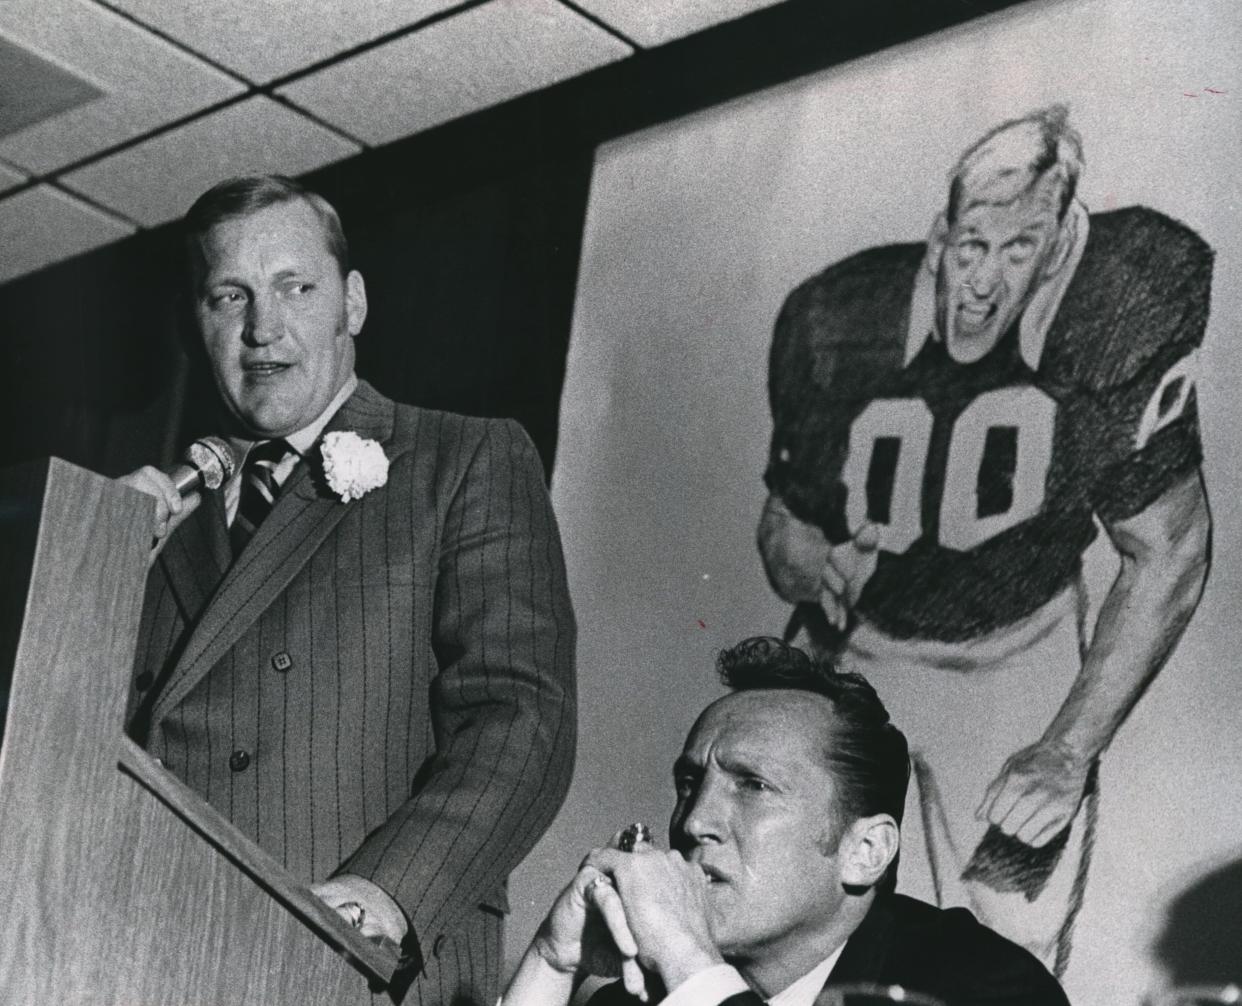 Jim Otto, left, Oakland Raiders center, was honored during Jim Otto Day in Wausau as 1,000 attended a dinner for him. With Otto here was Al Davis, owner-general manager of the Raiders, who also spoke at the fete.